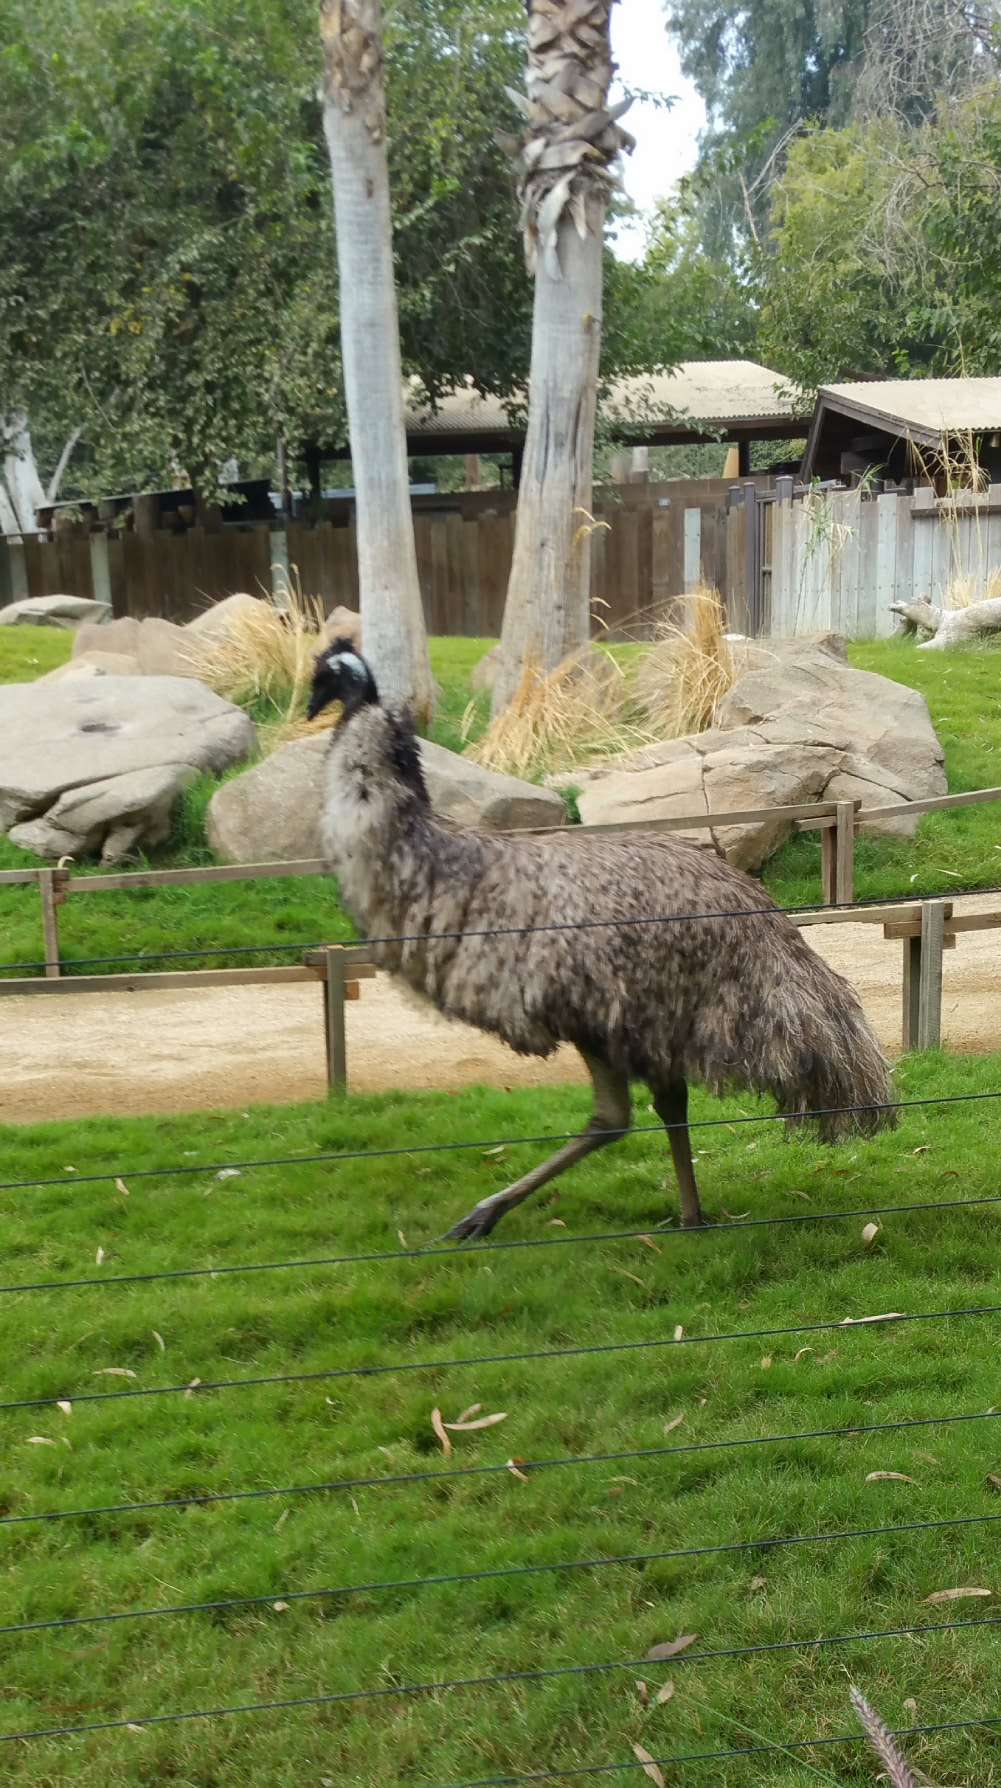 Emu. Not to be confused with Emo.